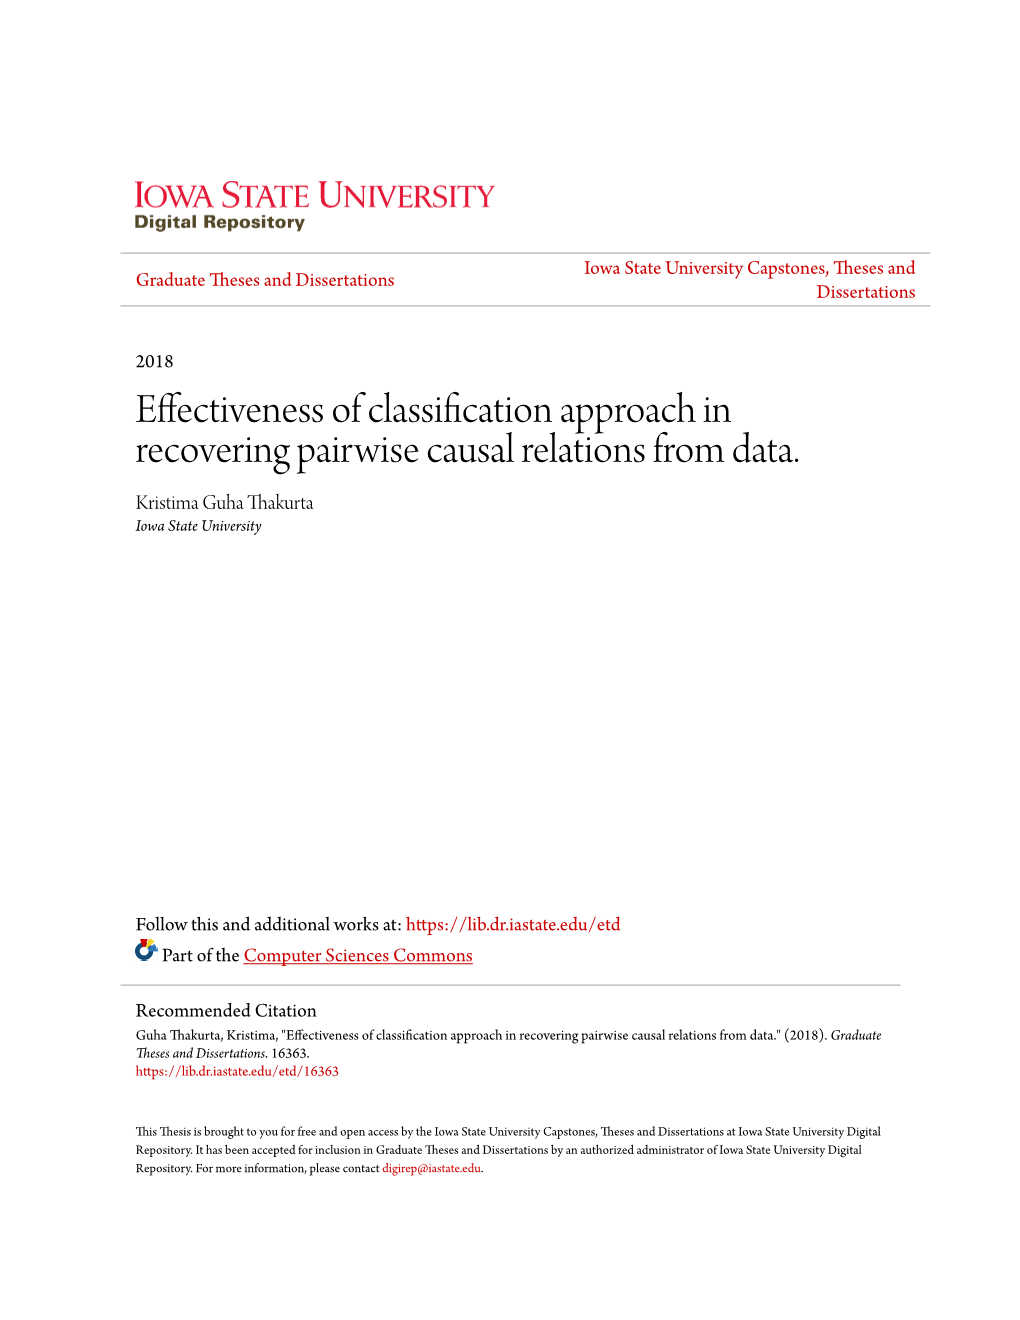 Effectiveness of Classification Approach in Recovering Pairwise Causal Relations from Data